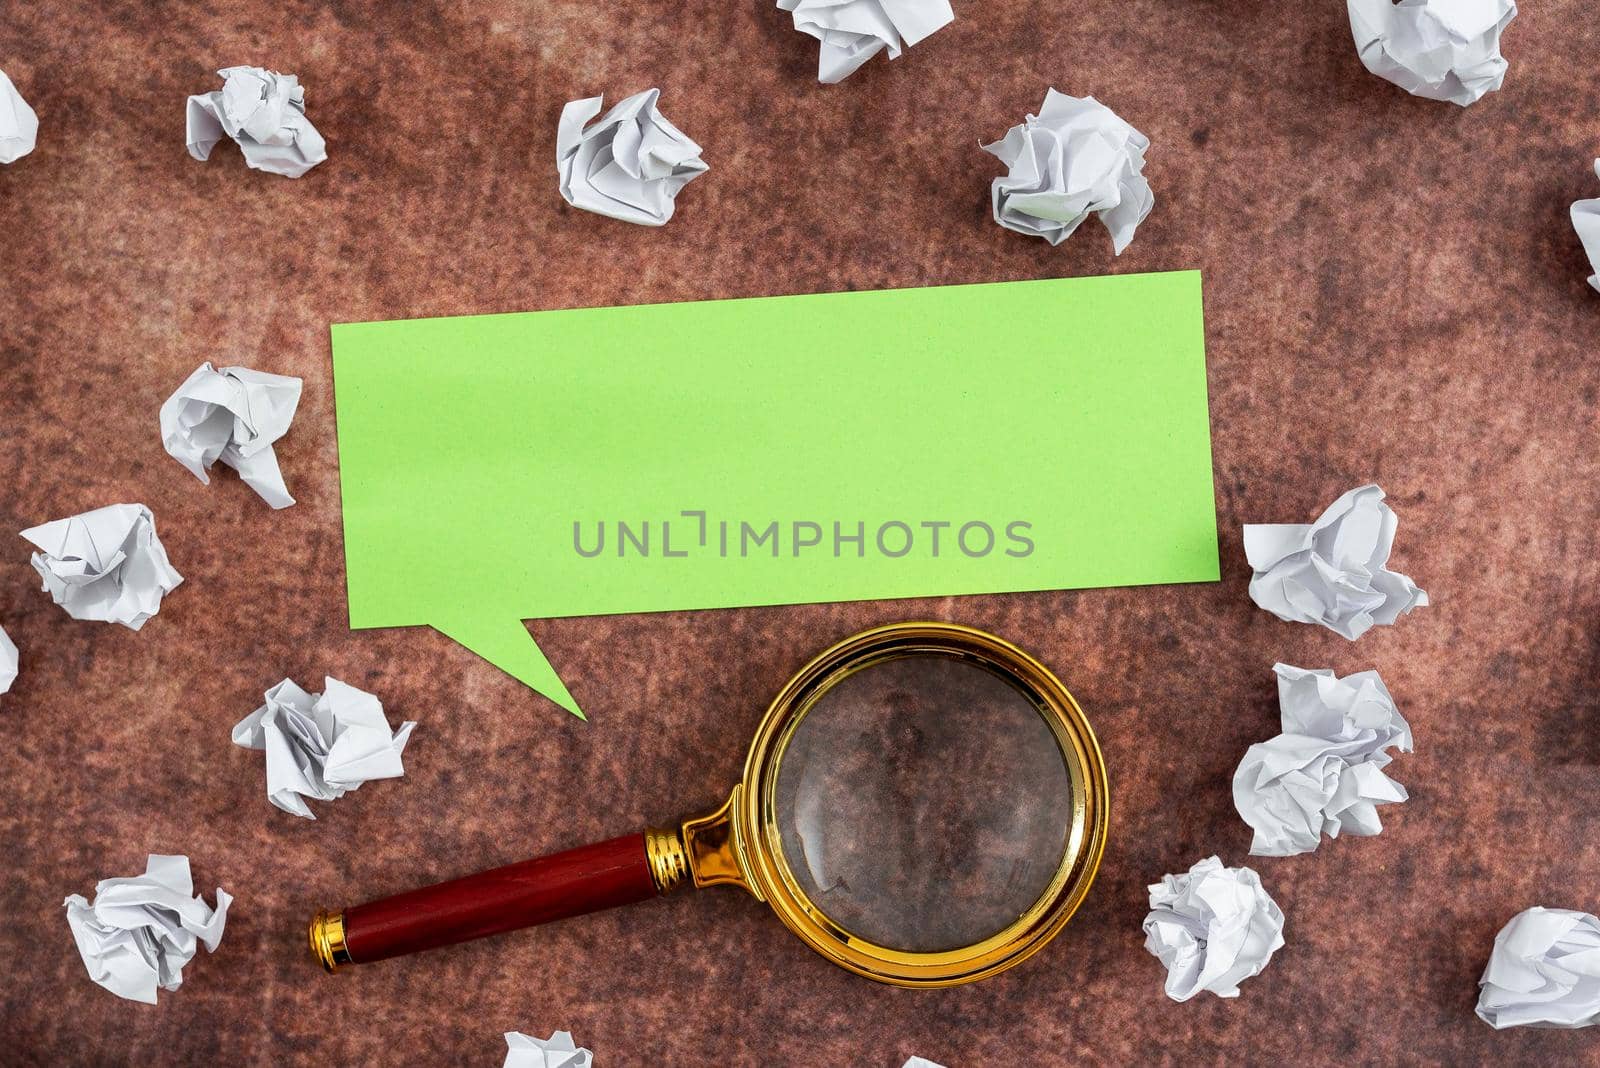 Speech Bubble Made Of Sheet With Magnifying Glass Surrounded With Crumpled Papers Over Wooden Background. It Is Showing Different Thoughts And Analyzing Strategies. by nialowwa